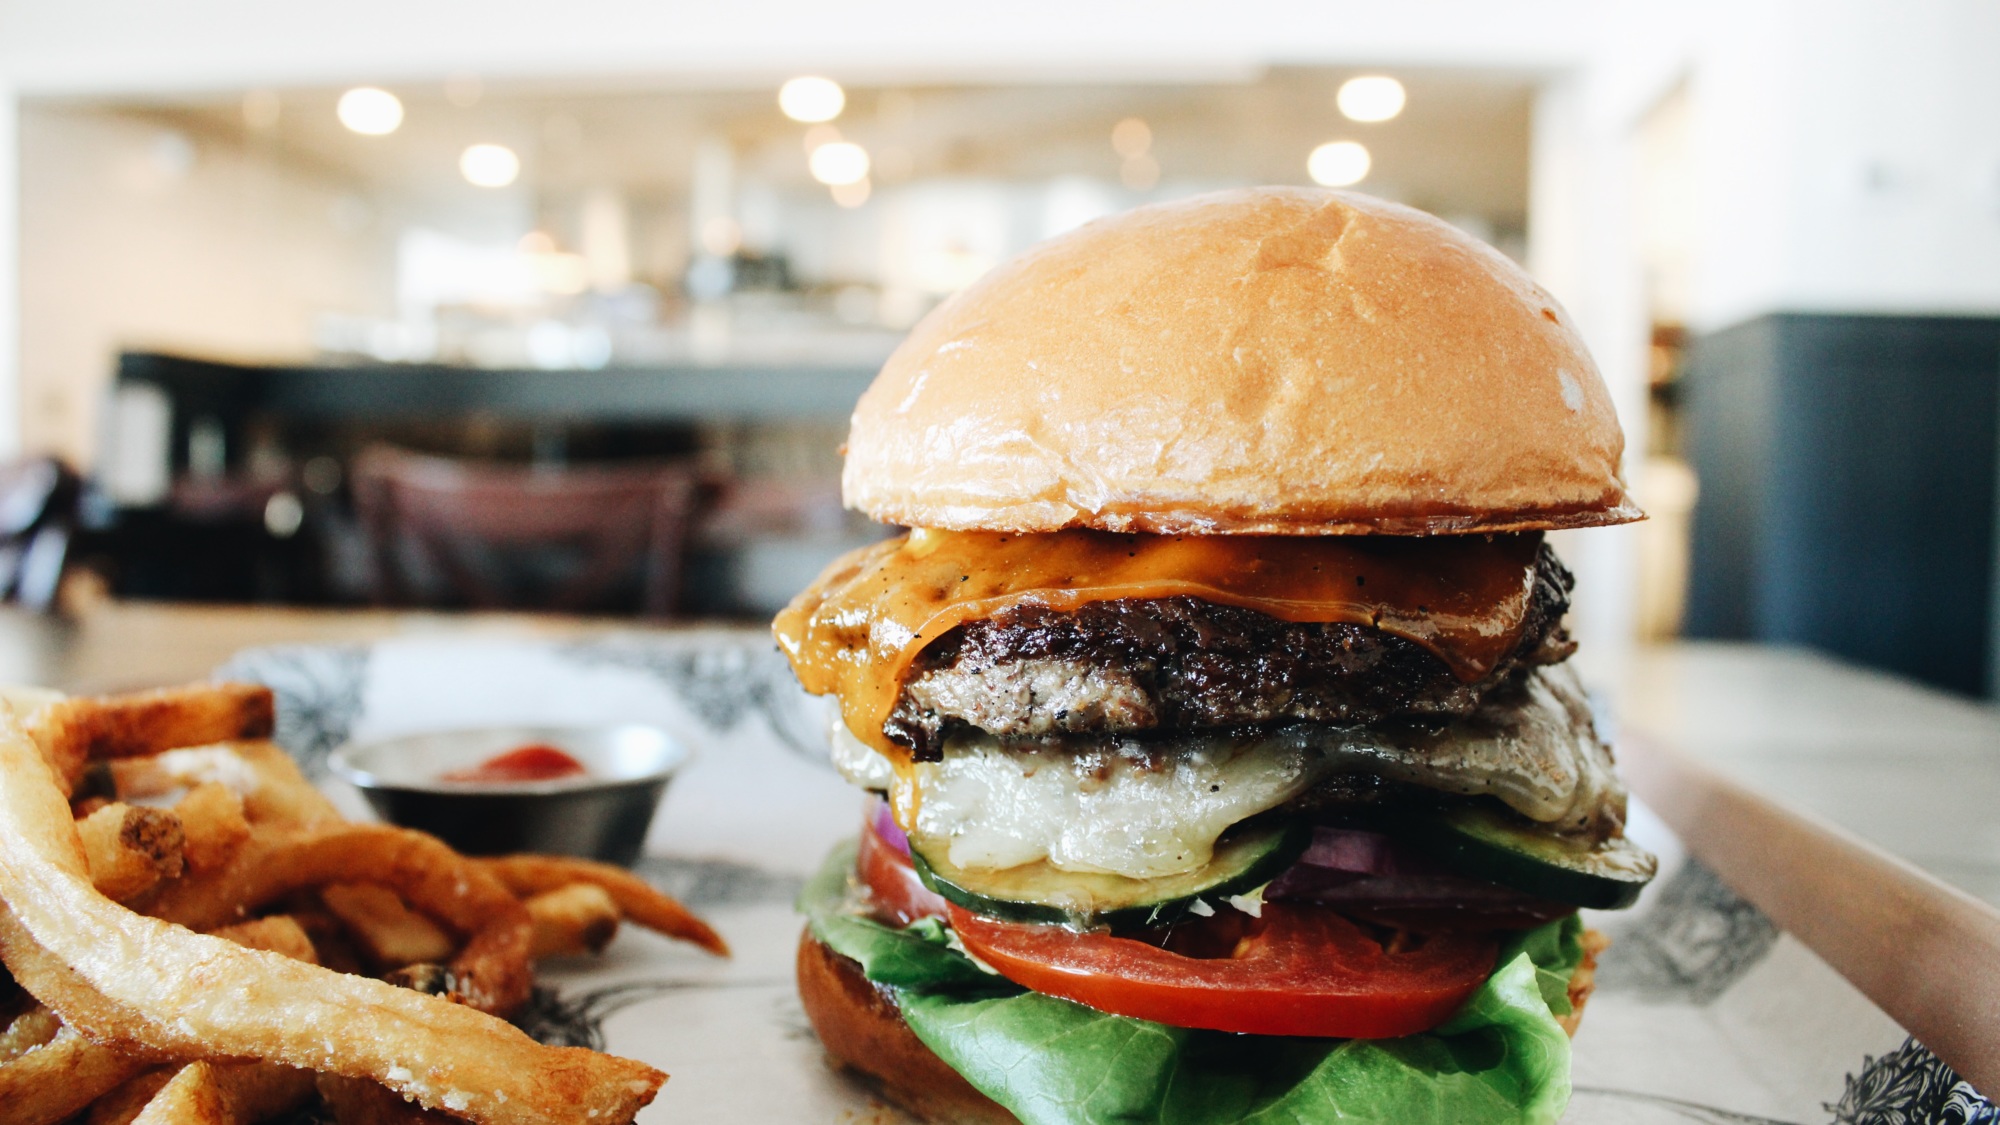 In case you wanted a burger this month ... // Photo courtesy of The Copper Cow